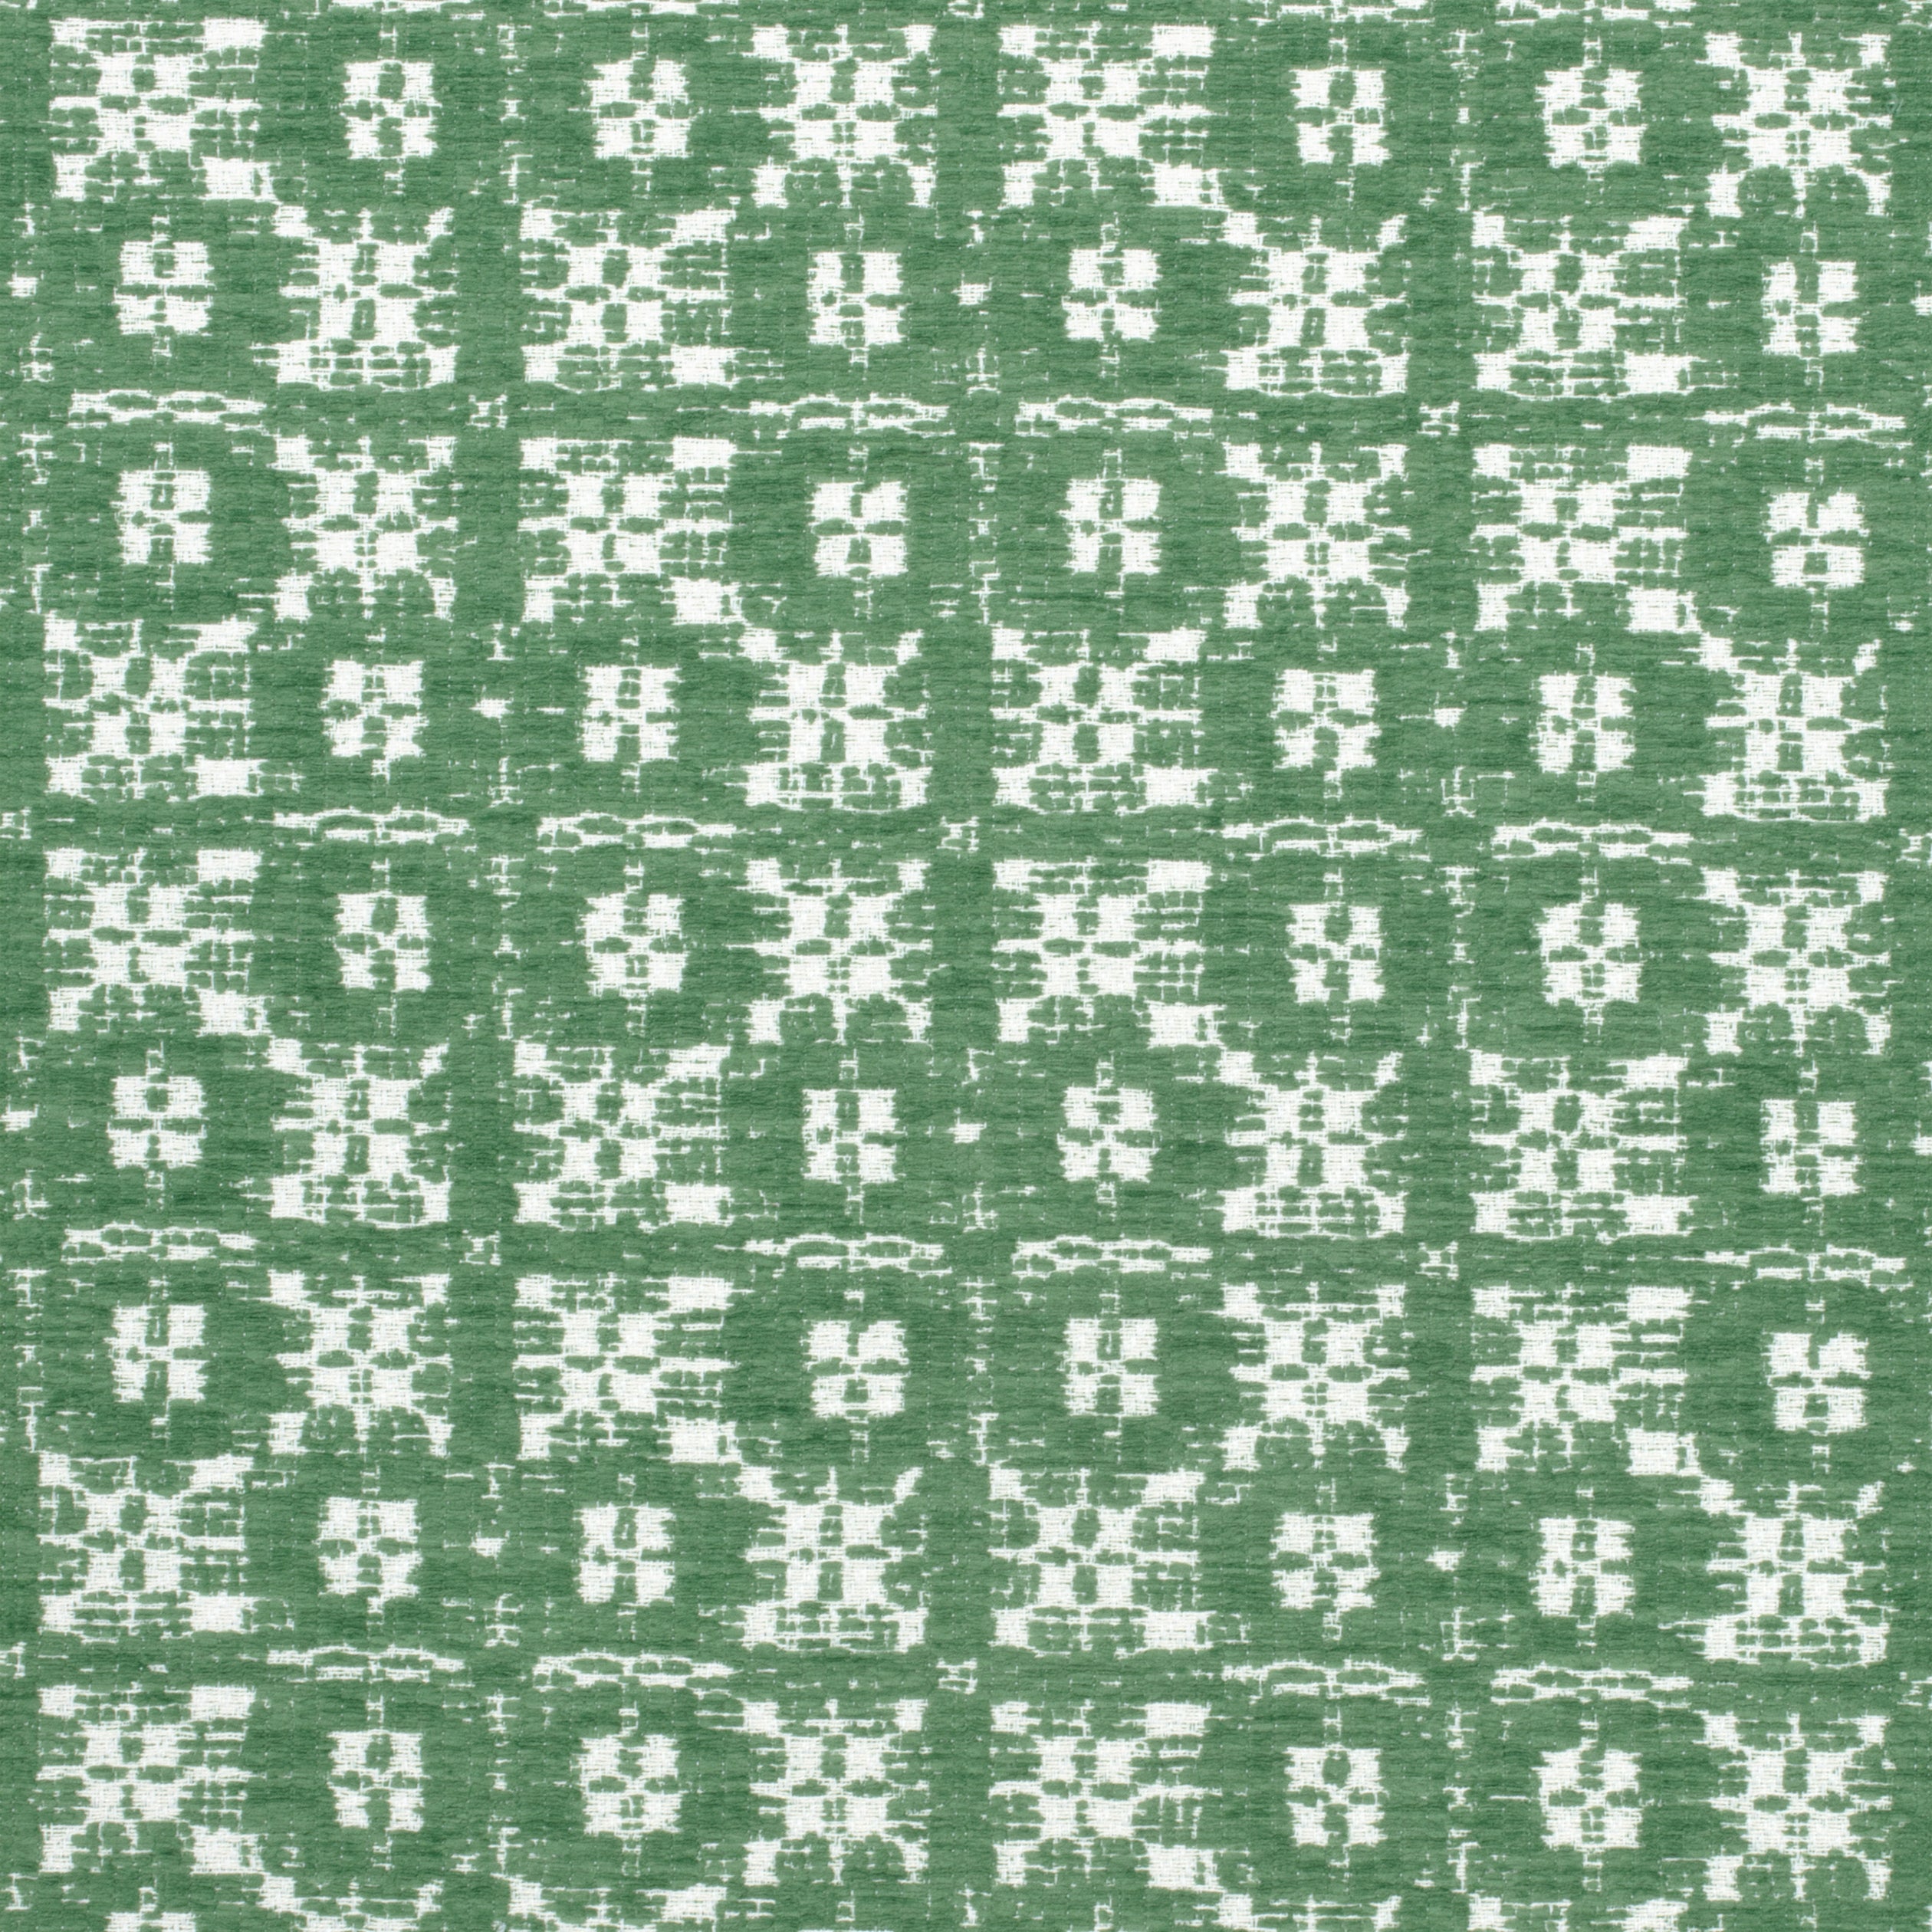 Brimfield fabric in kelly green color - pattern number W73501 - by Thibaut in the Landmark collection